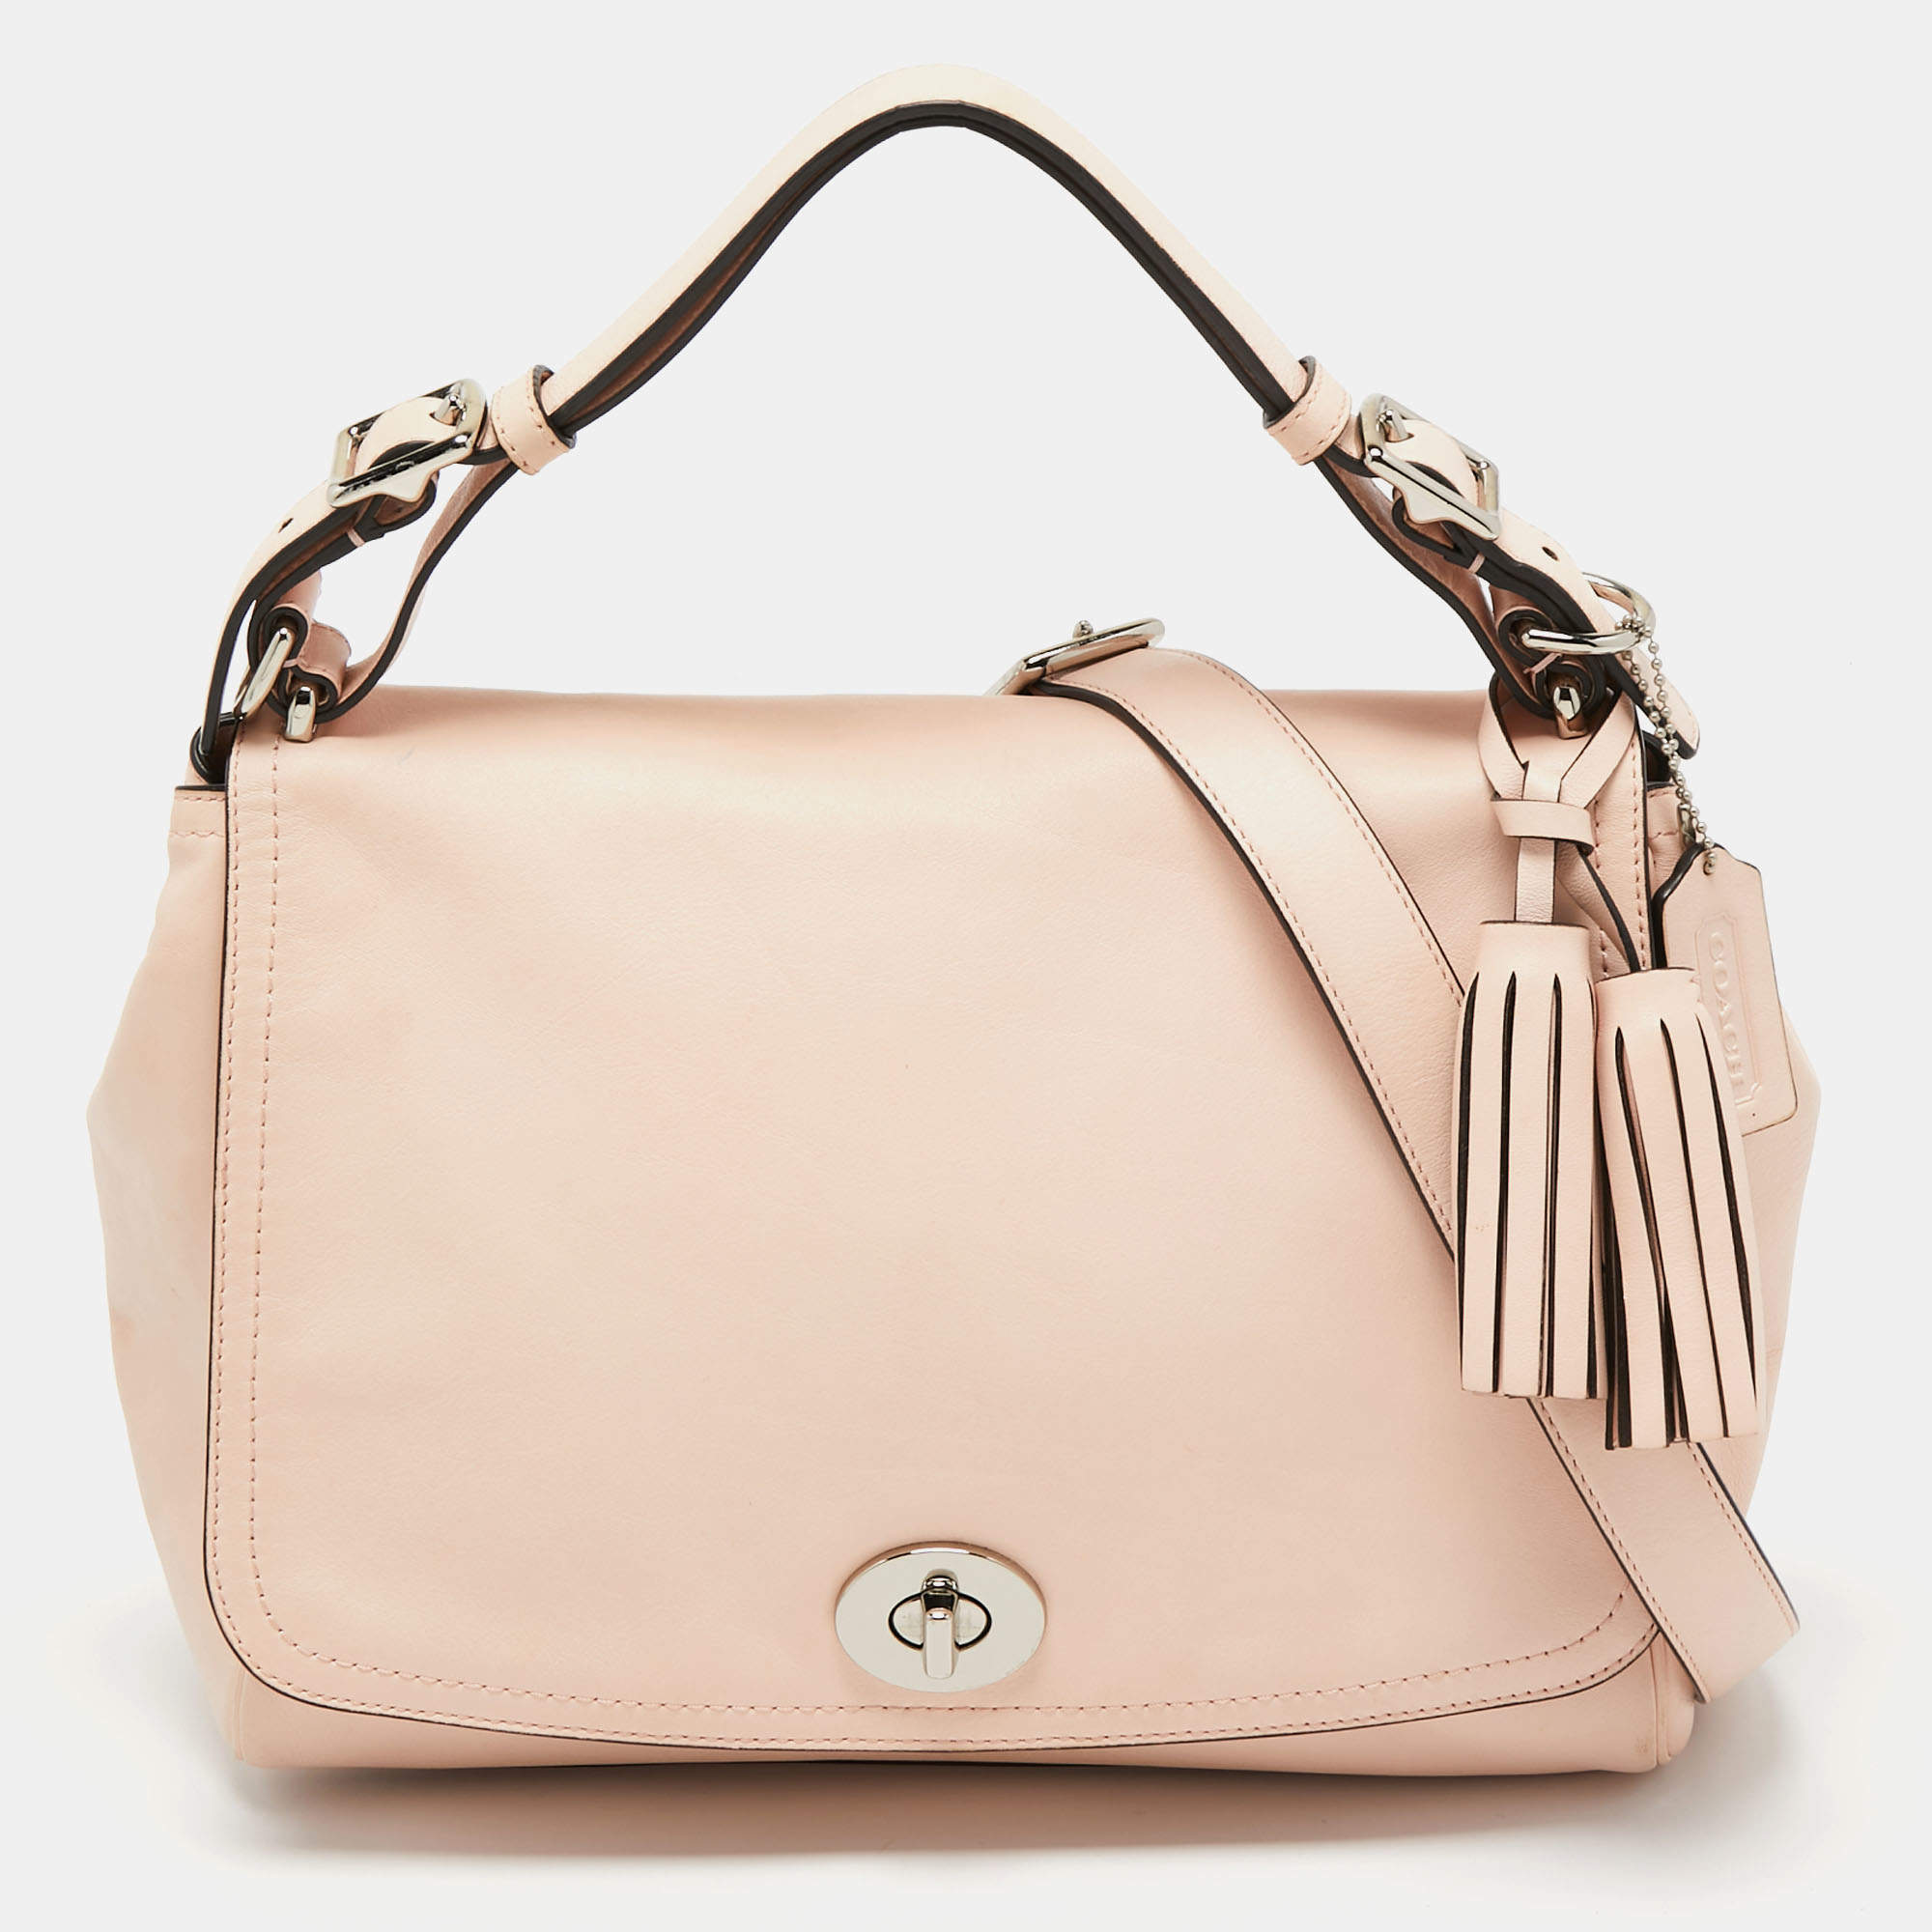 Coach Pink Leather Legacy Romy Top Handle Bag